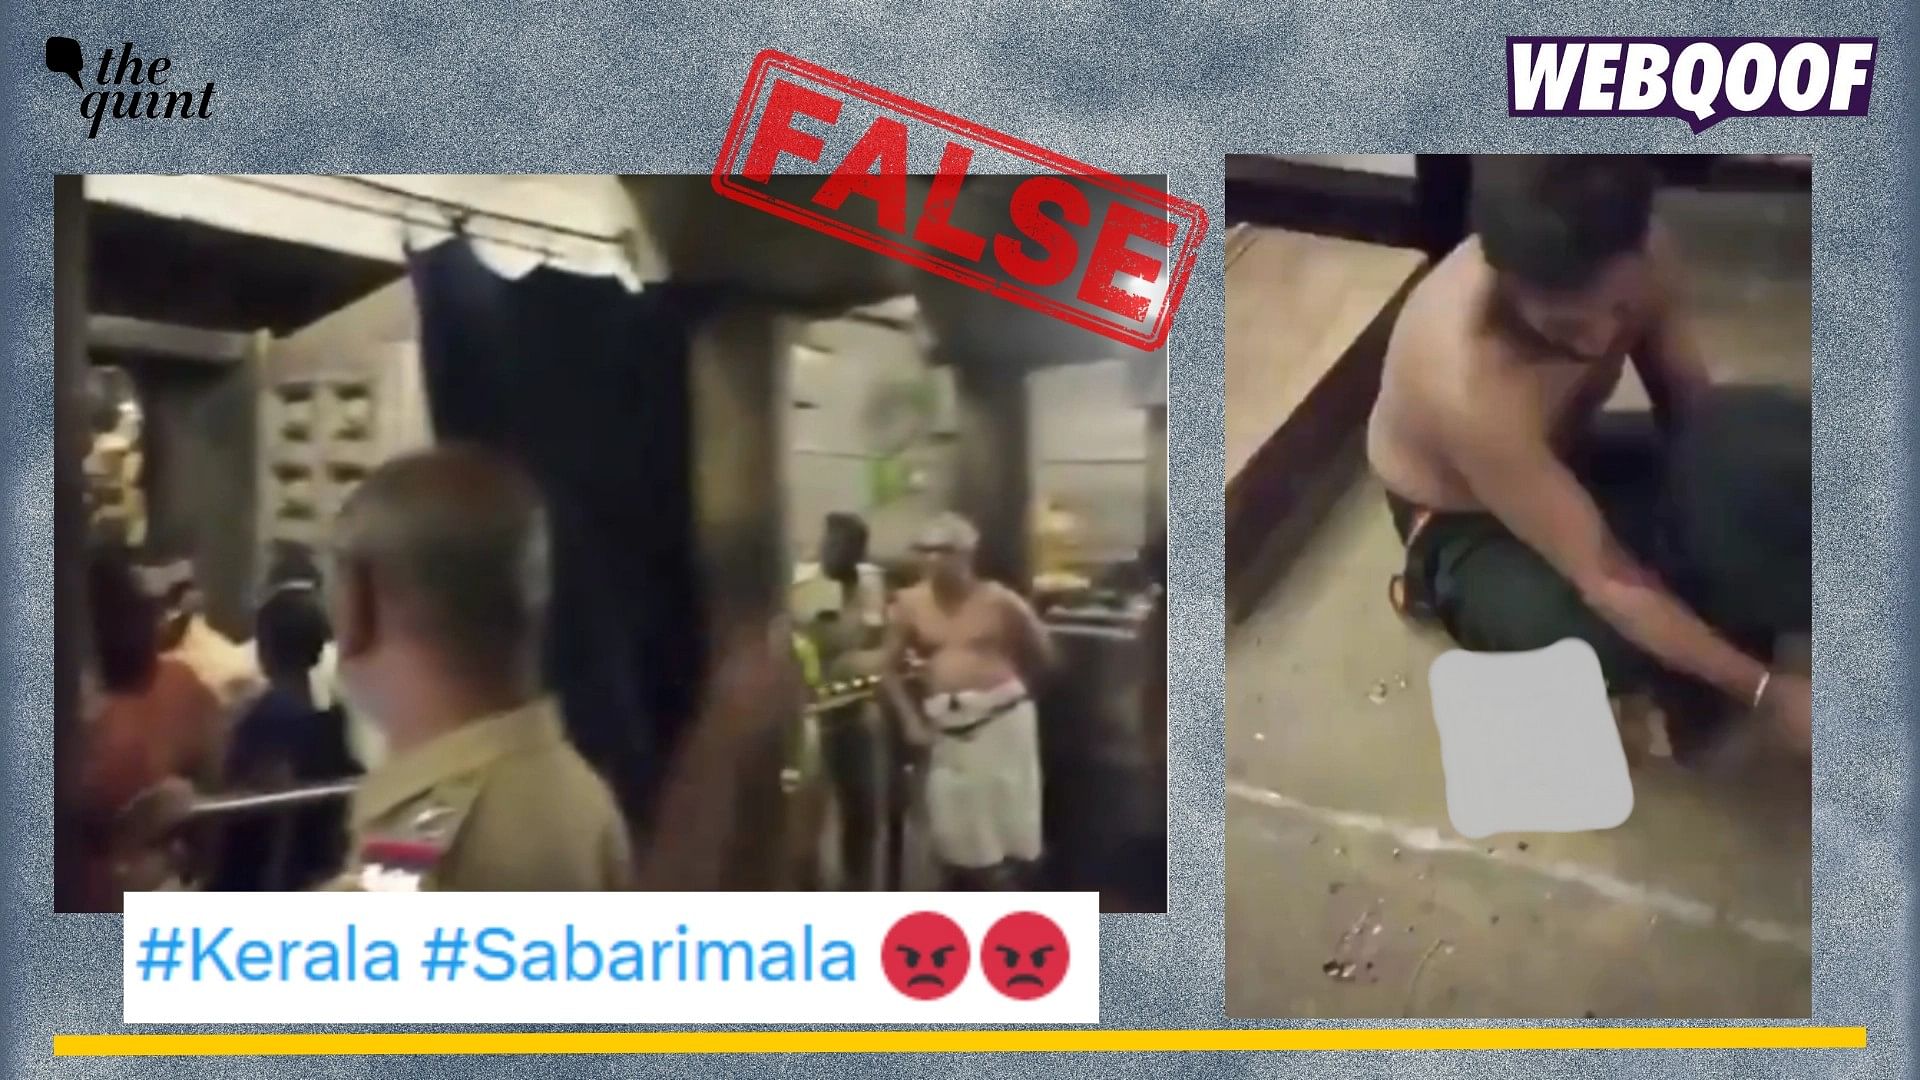 <div class="paragraphs"><p>Fact-check: A video of an injured man from a temple in Tamil Nadu is being falsely shared as from Sabarimala temple, Kerala.</p></div>